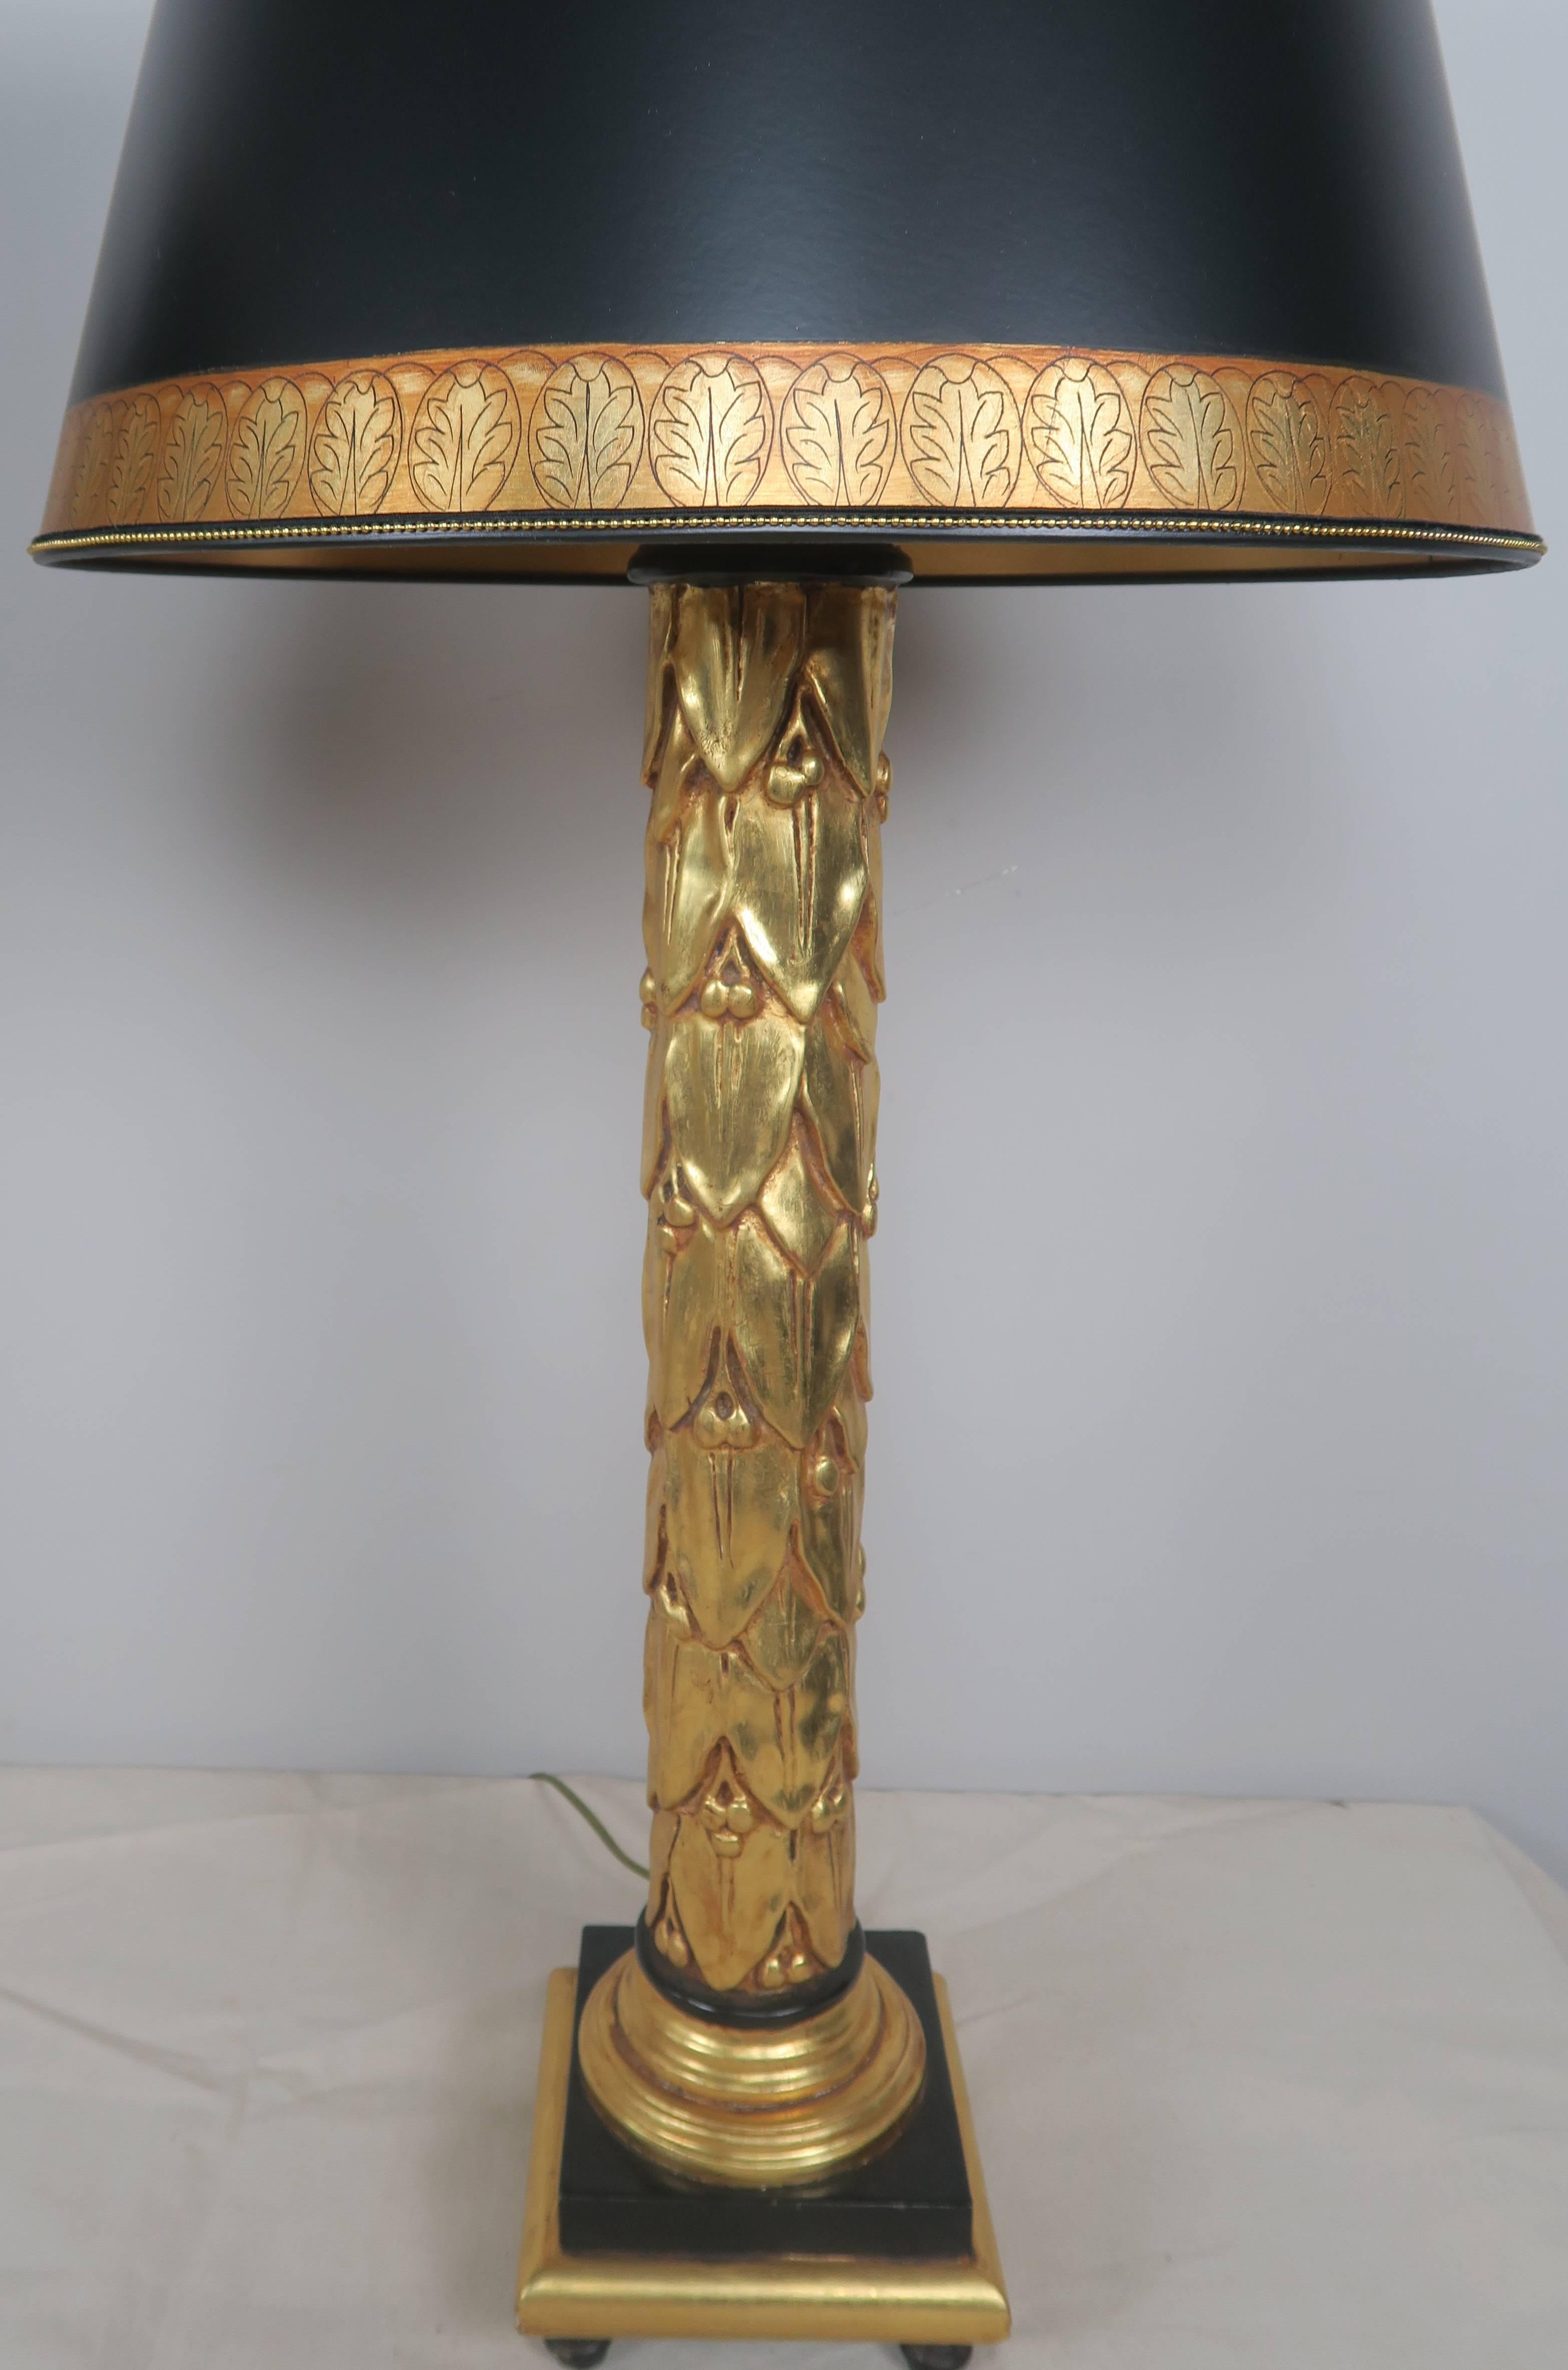 Hand-Painted Neoclassical Style 22-Karat Gold Leaf and Black Lamps with Parchment Shades Pair